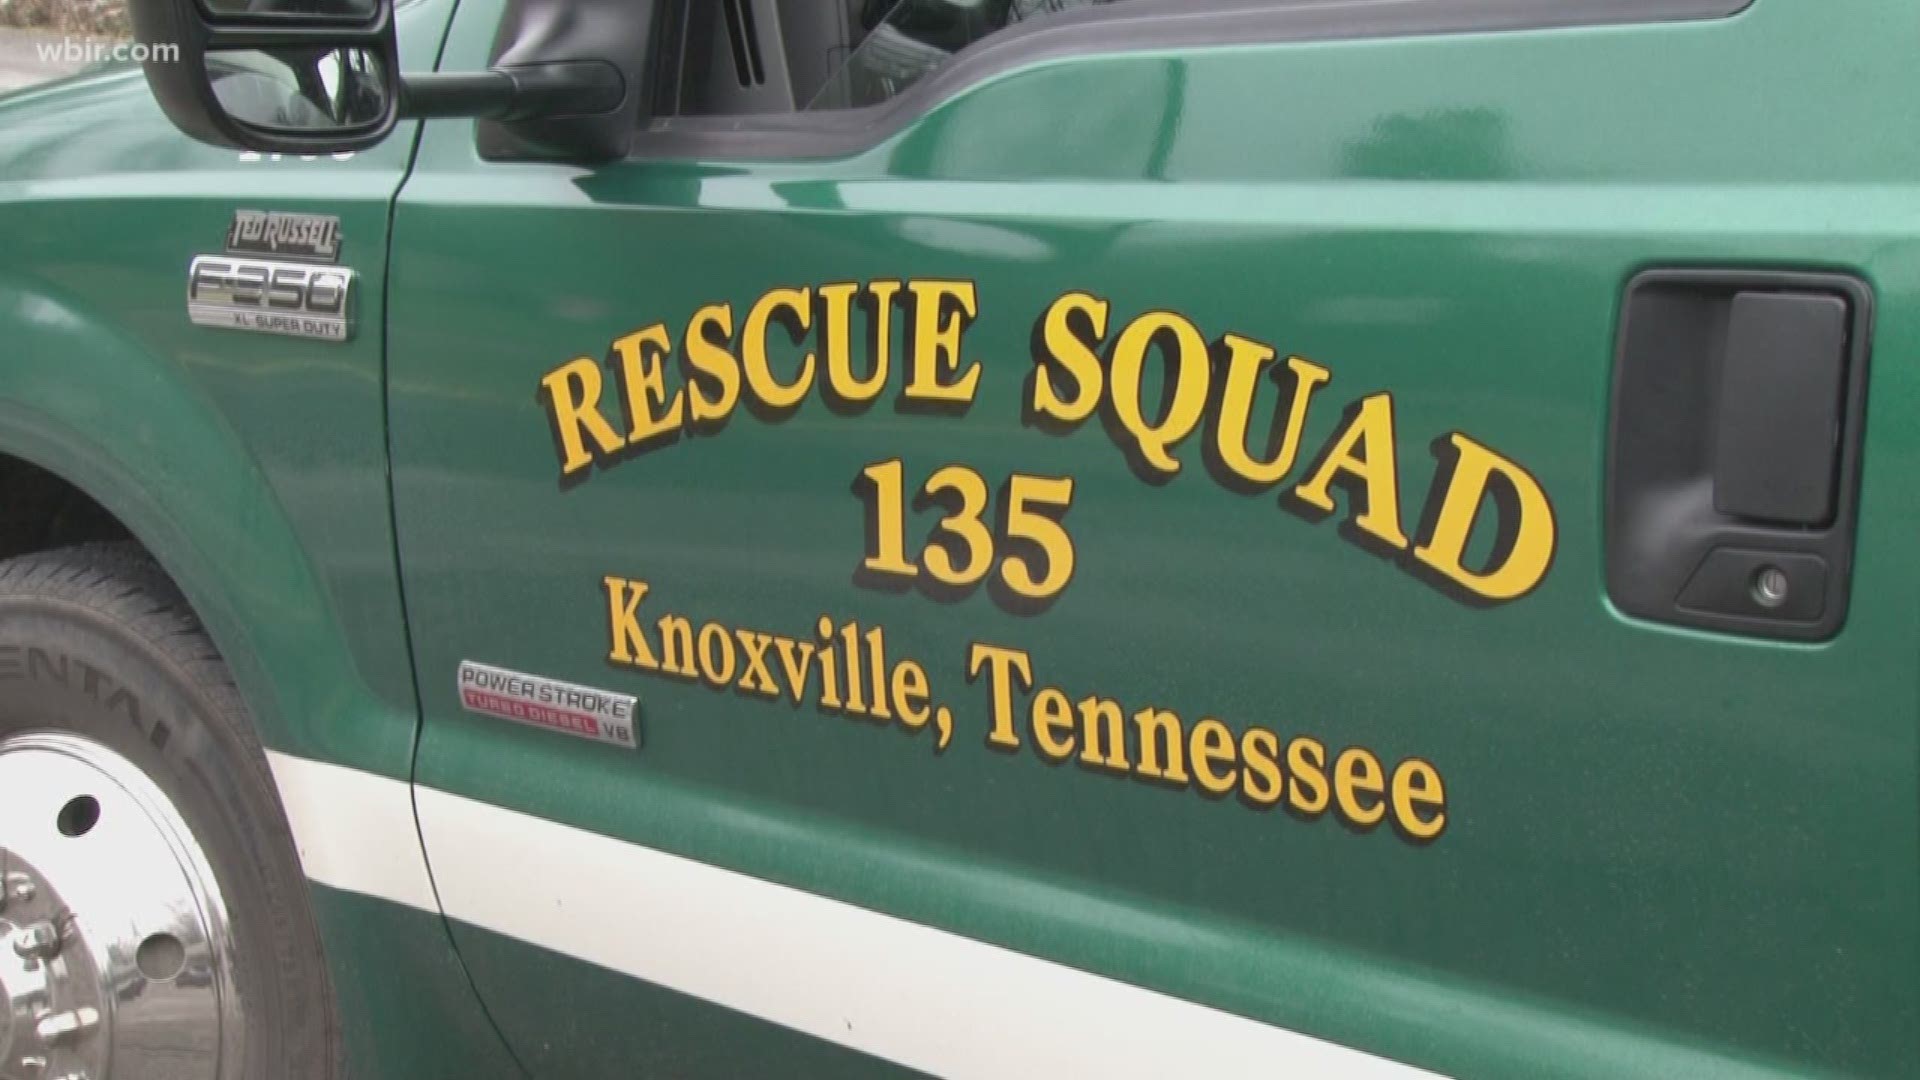 The Knoxville Volunteer Rescue Squad stands by to save lives every day. The United Way of Greater Knoxville helps make their work possible.